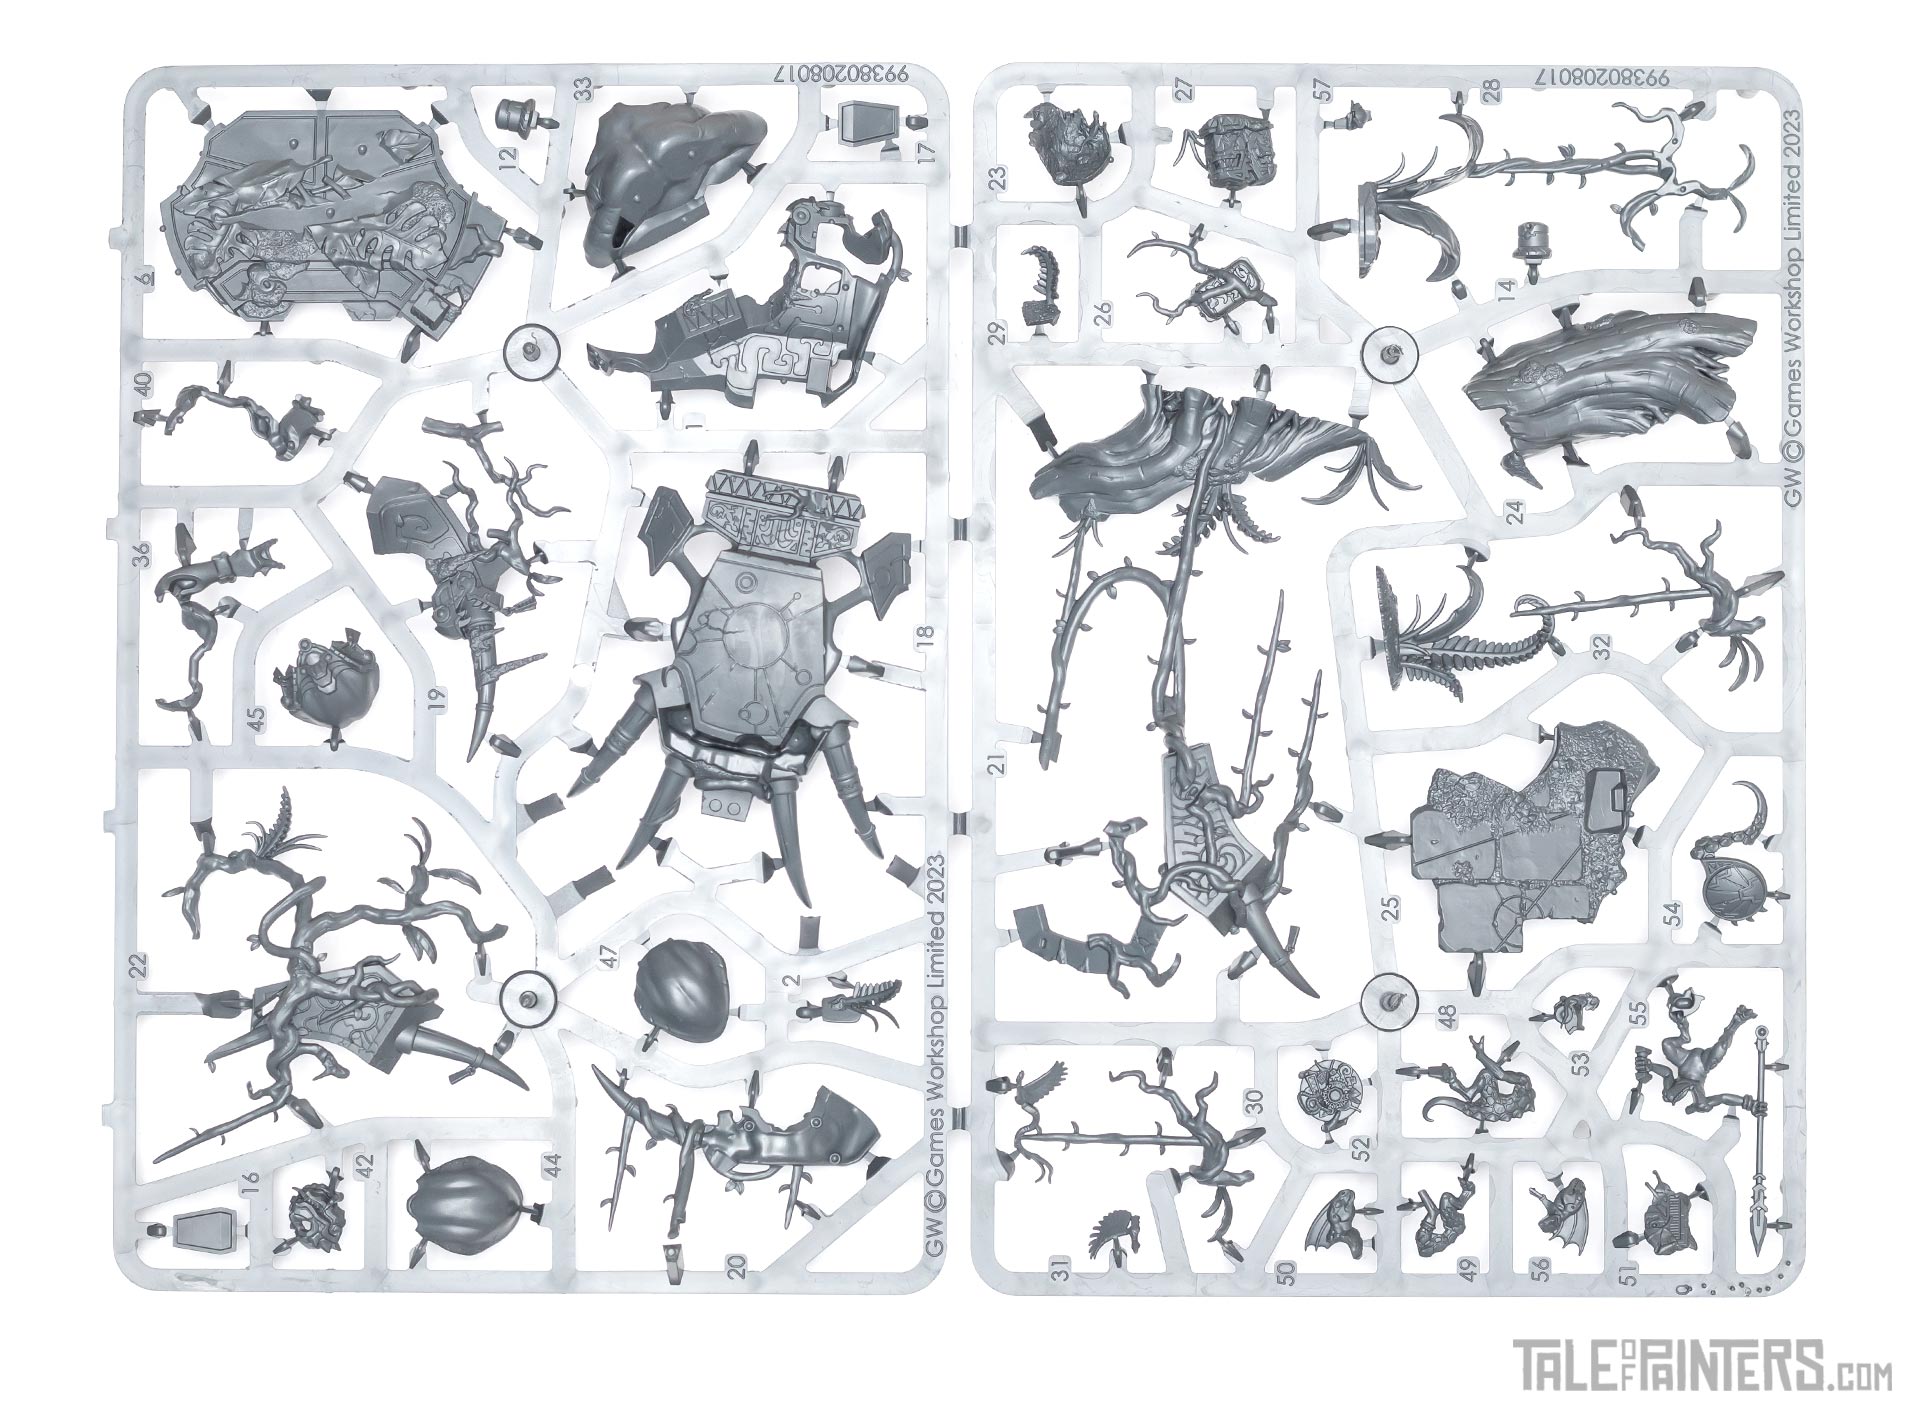 Slann Starmaster sprues 1 and 2 from the Seraphon army set